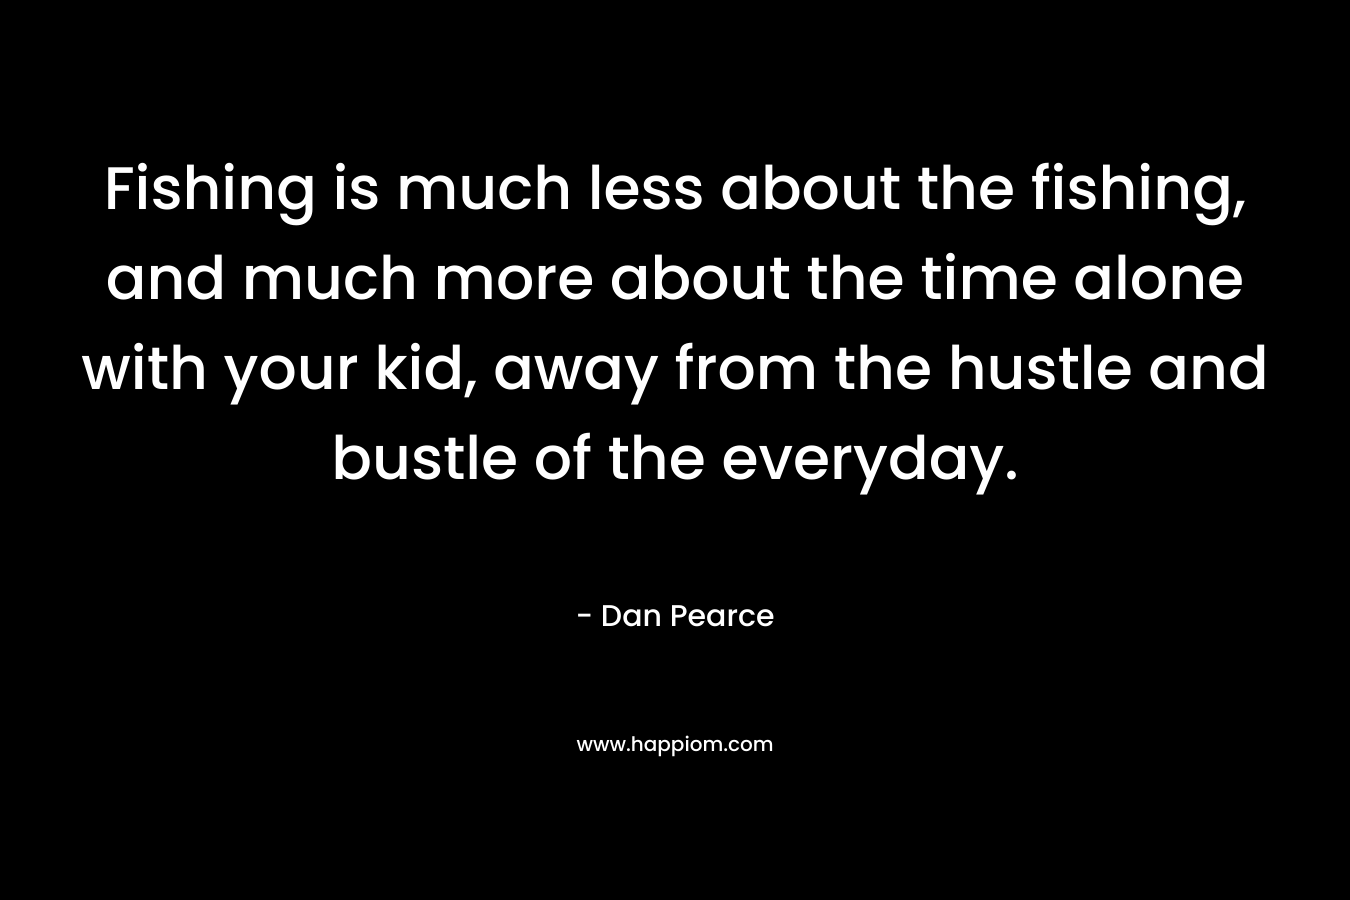 Fishing is much less about the fishing, and much more about the time alone with your kid, away from the hustle and bustle of the everyday. – Dan Pearce